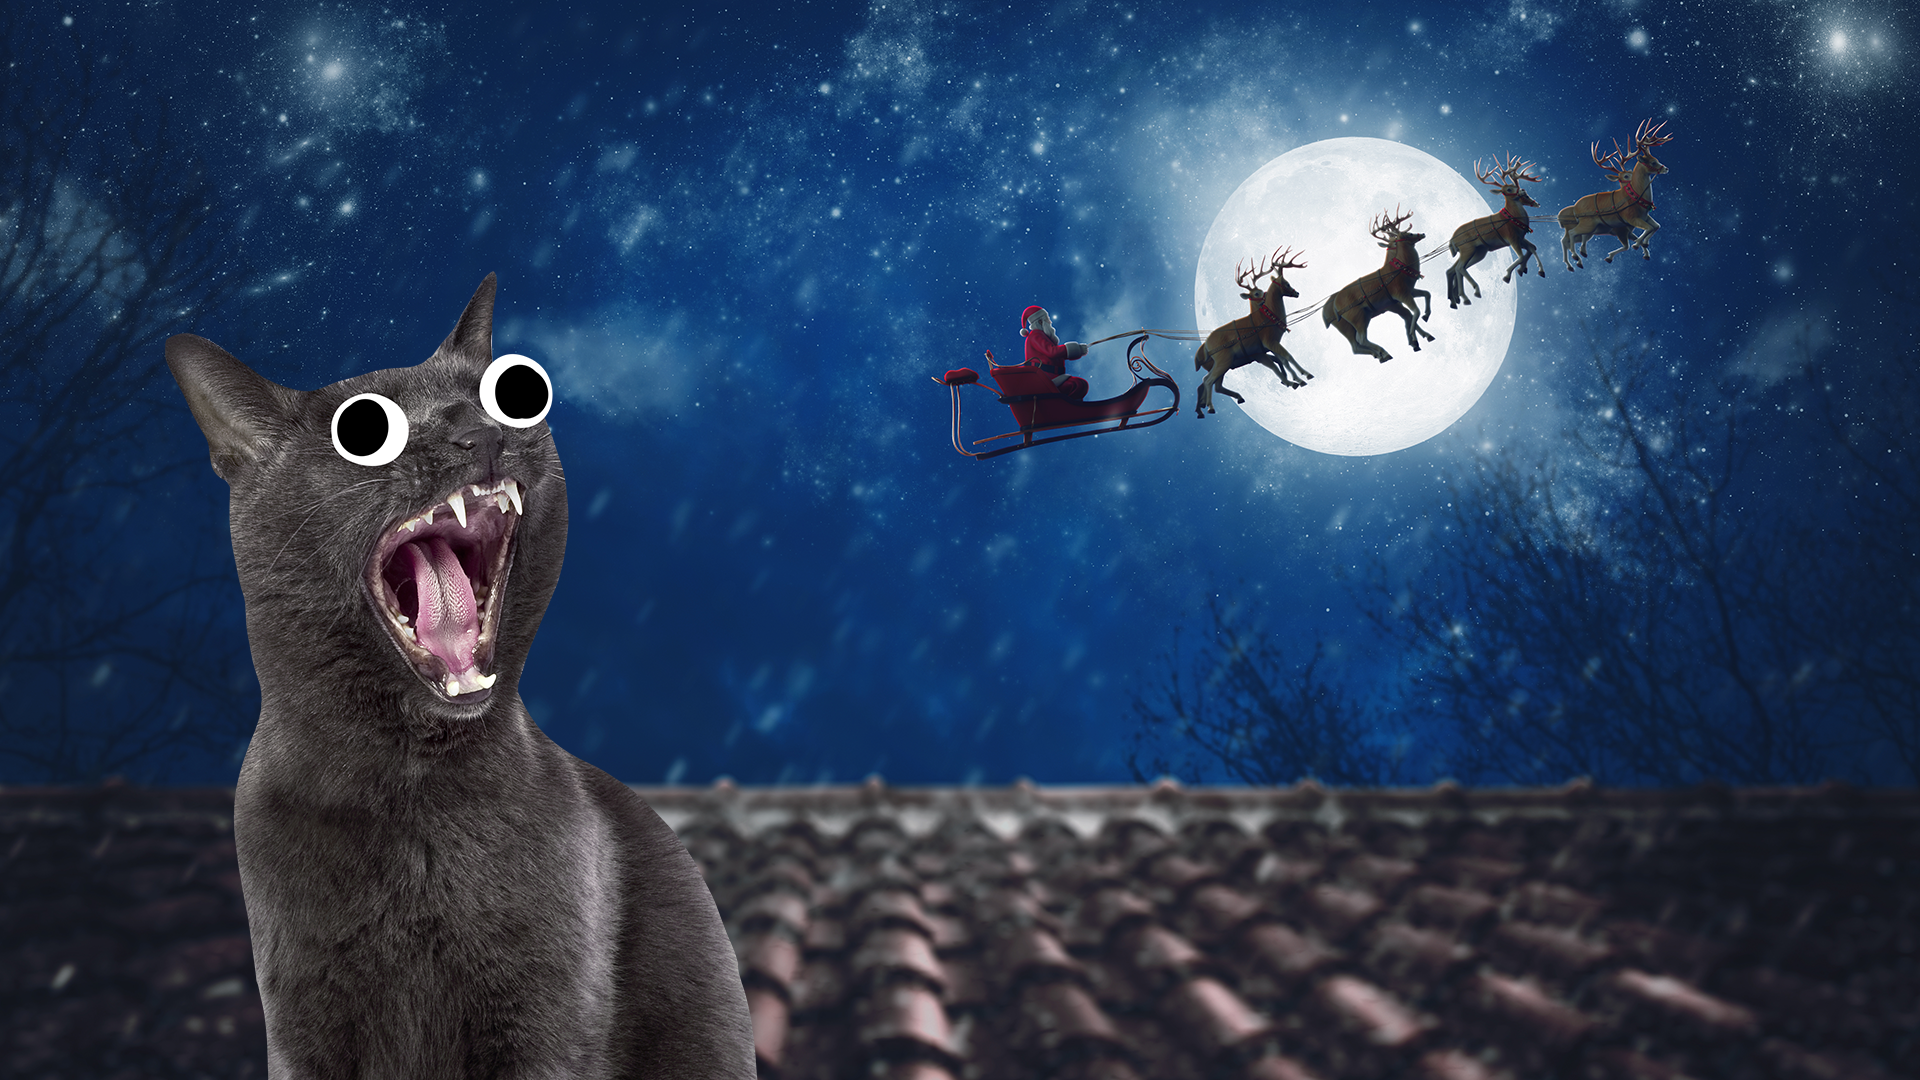 A black cat meowing at Santa and his reindeer